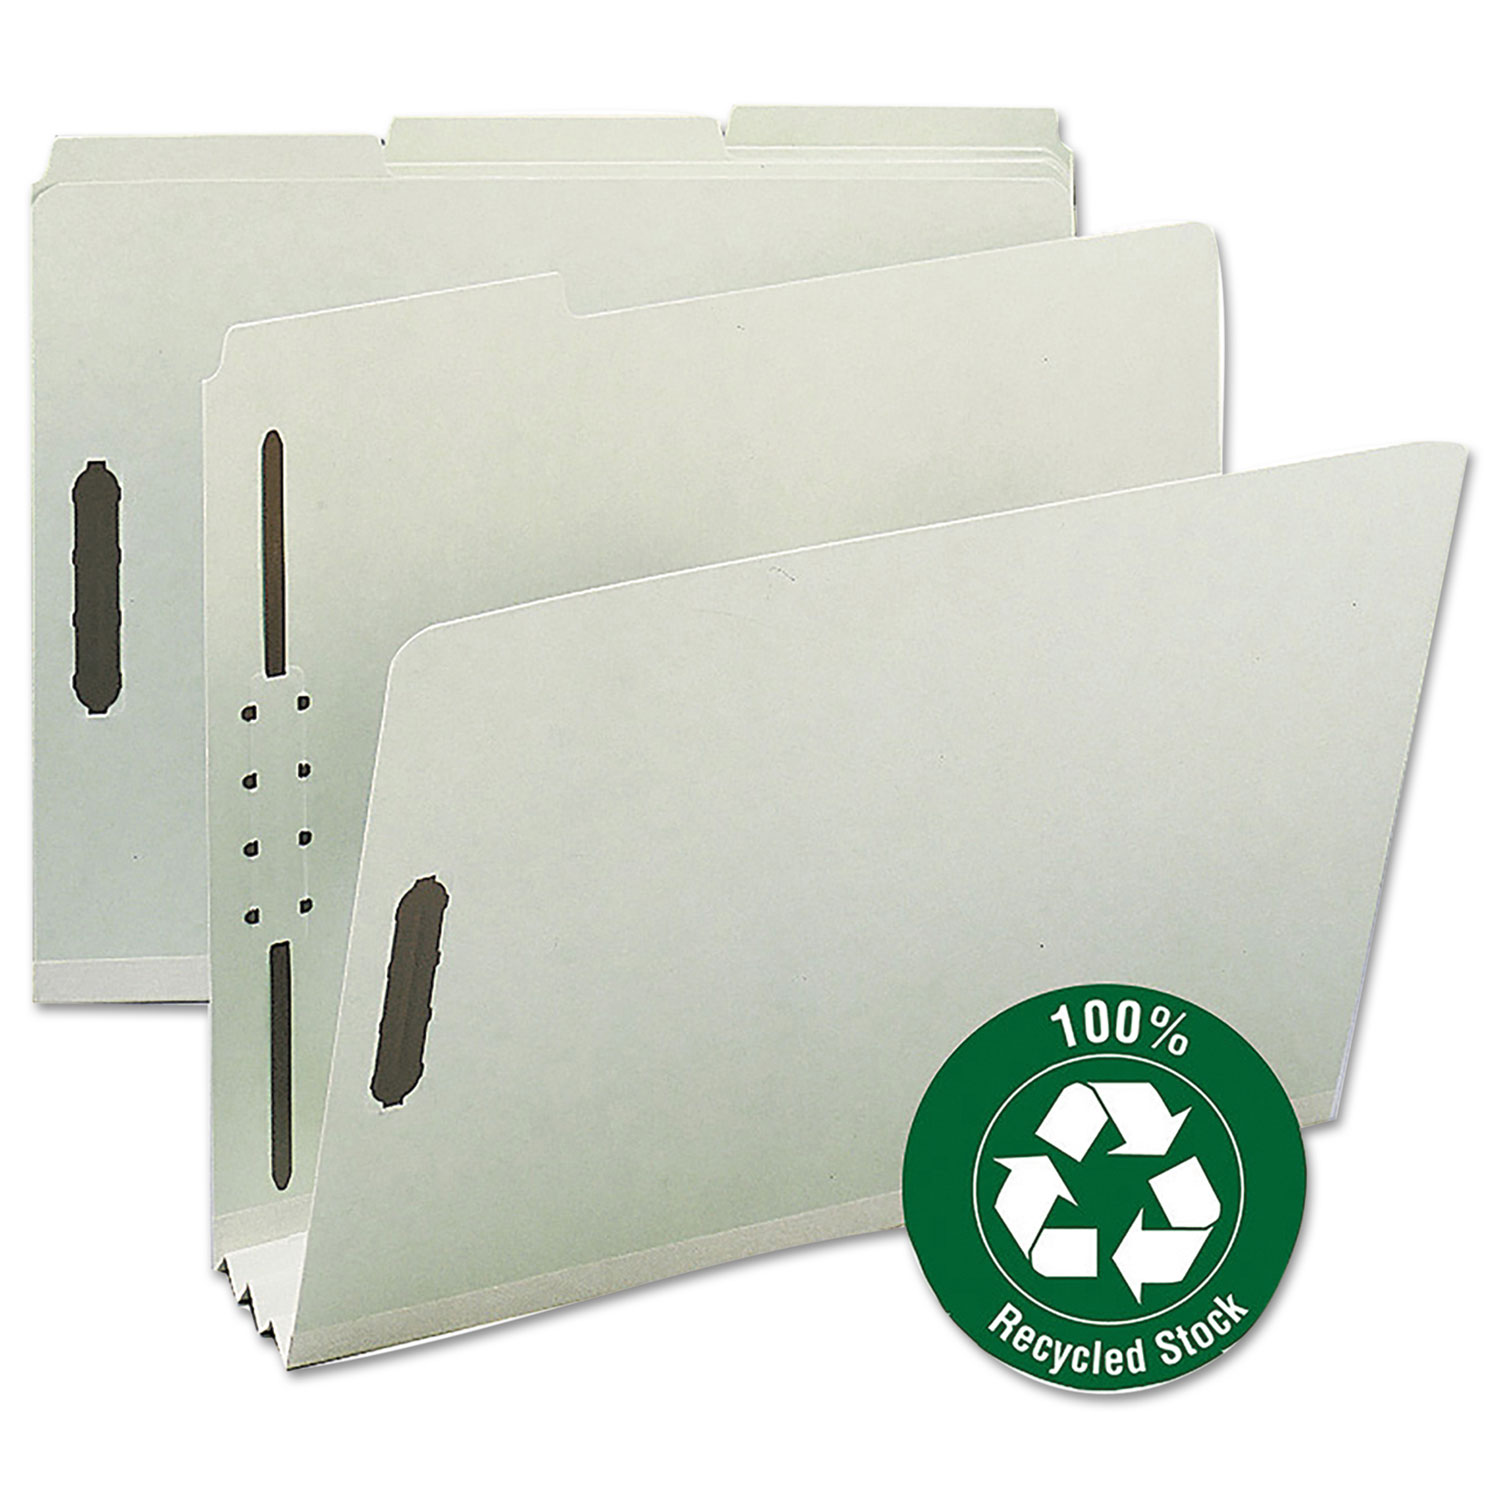  Smead 15005 100% Recycled Pressboard Fastener Folders, Letter Size, Gray-Green, 25/Box (SMD15005) 